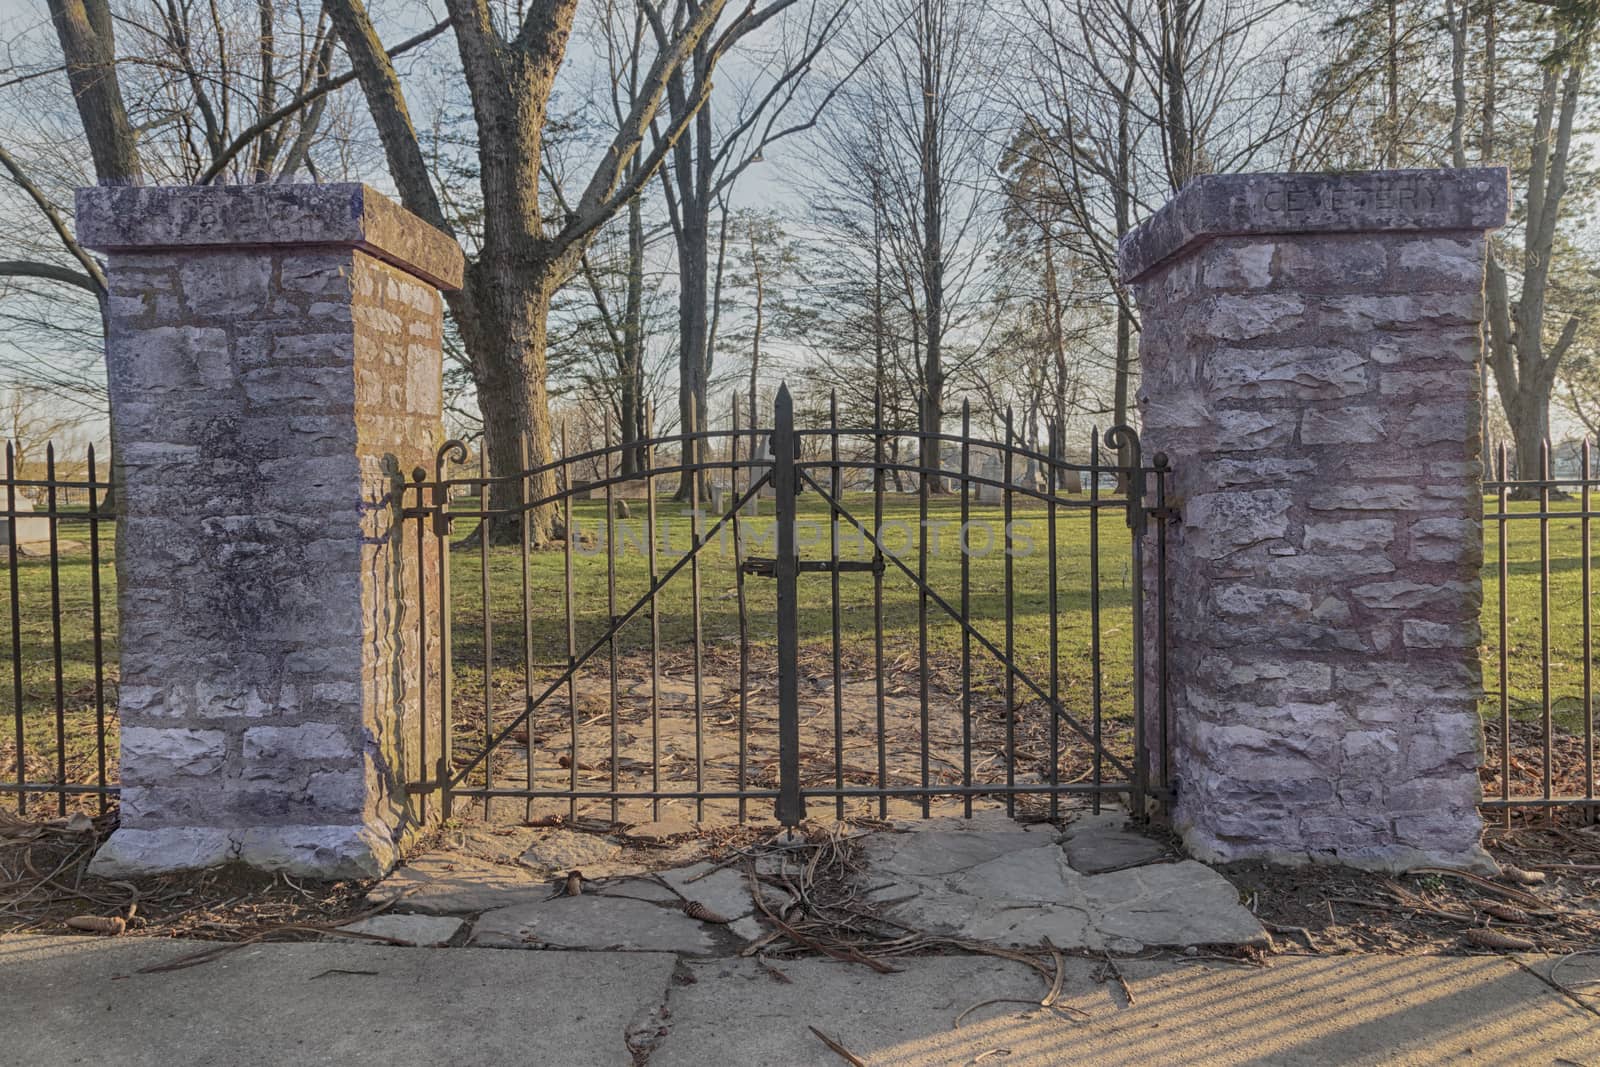 Gothic iron cemetery gates on brick posts. Bare trees in the background.